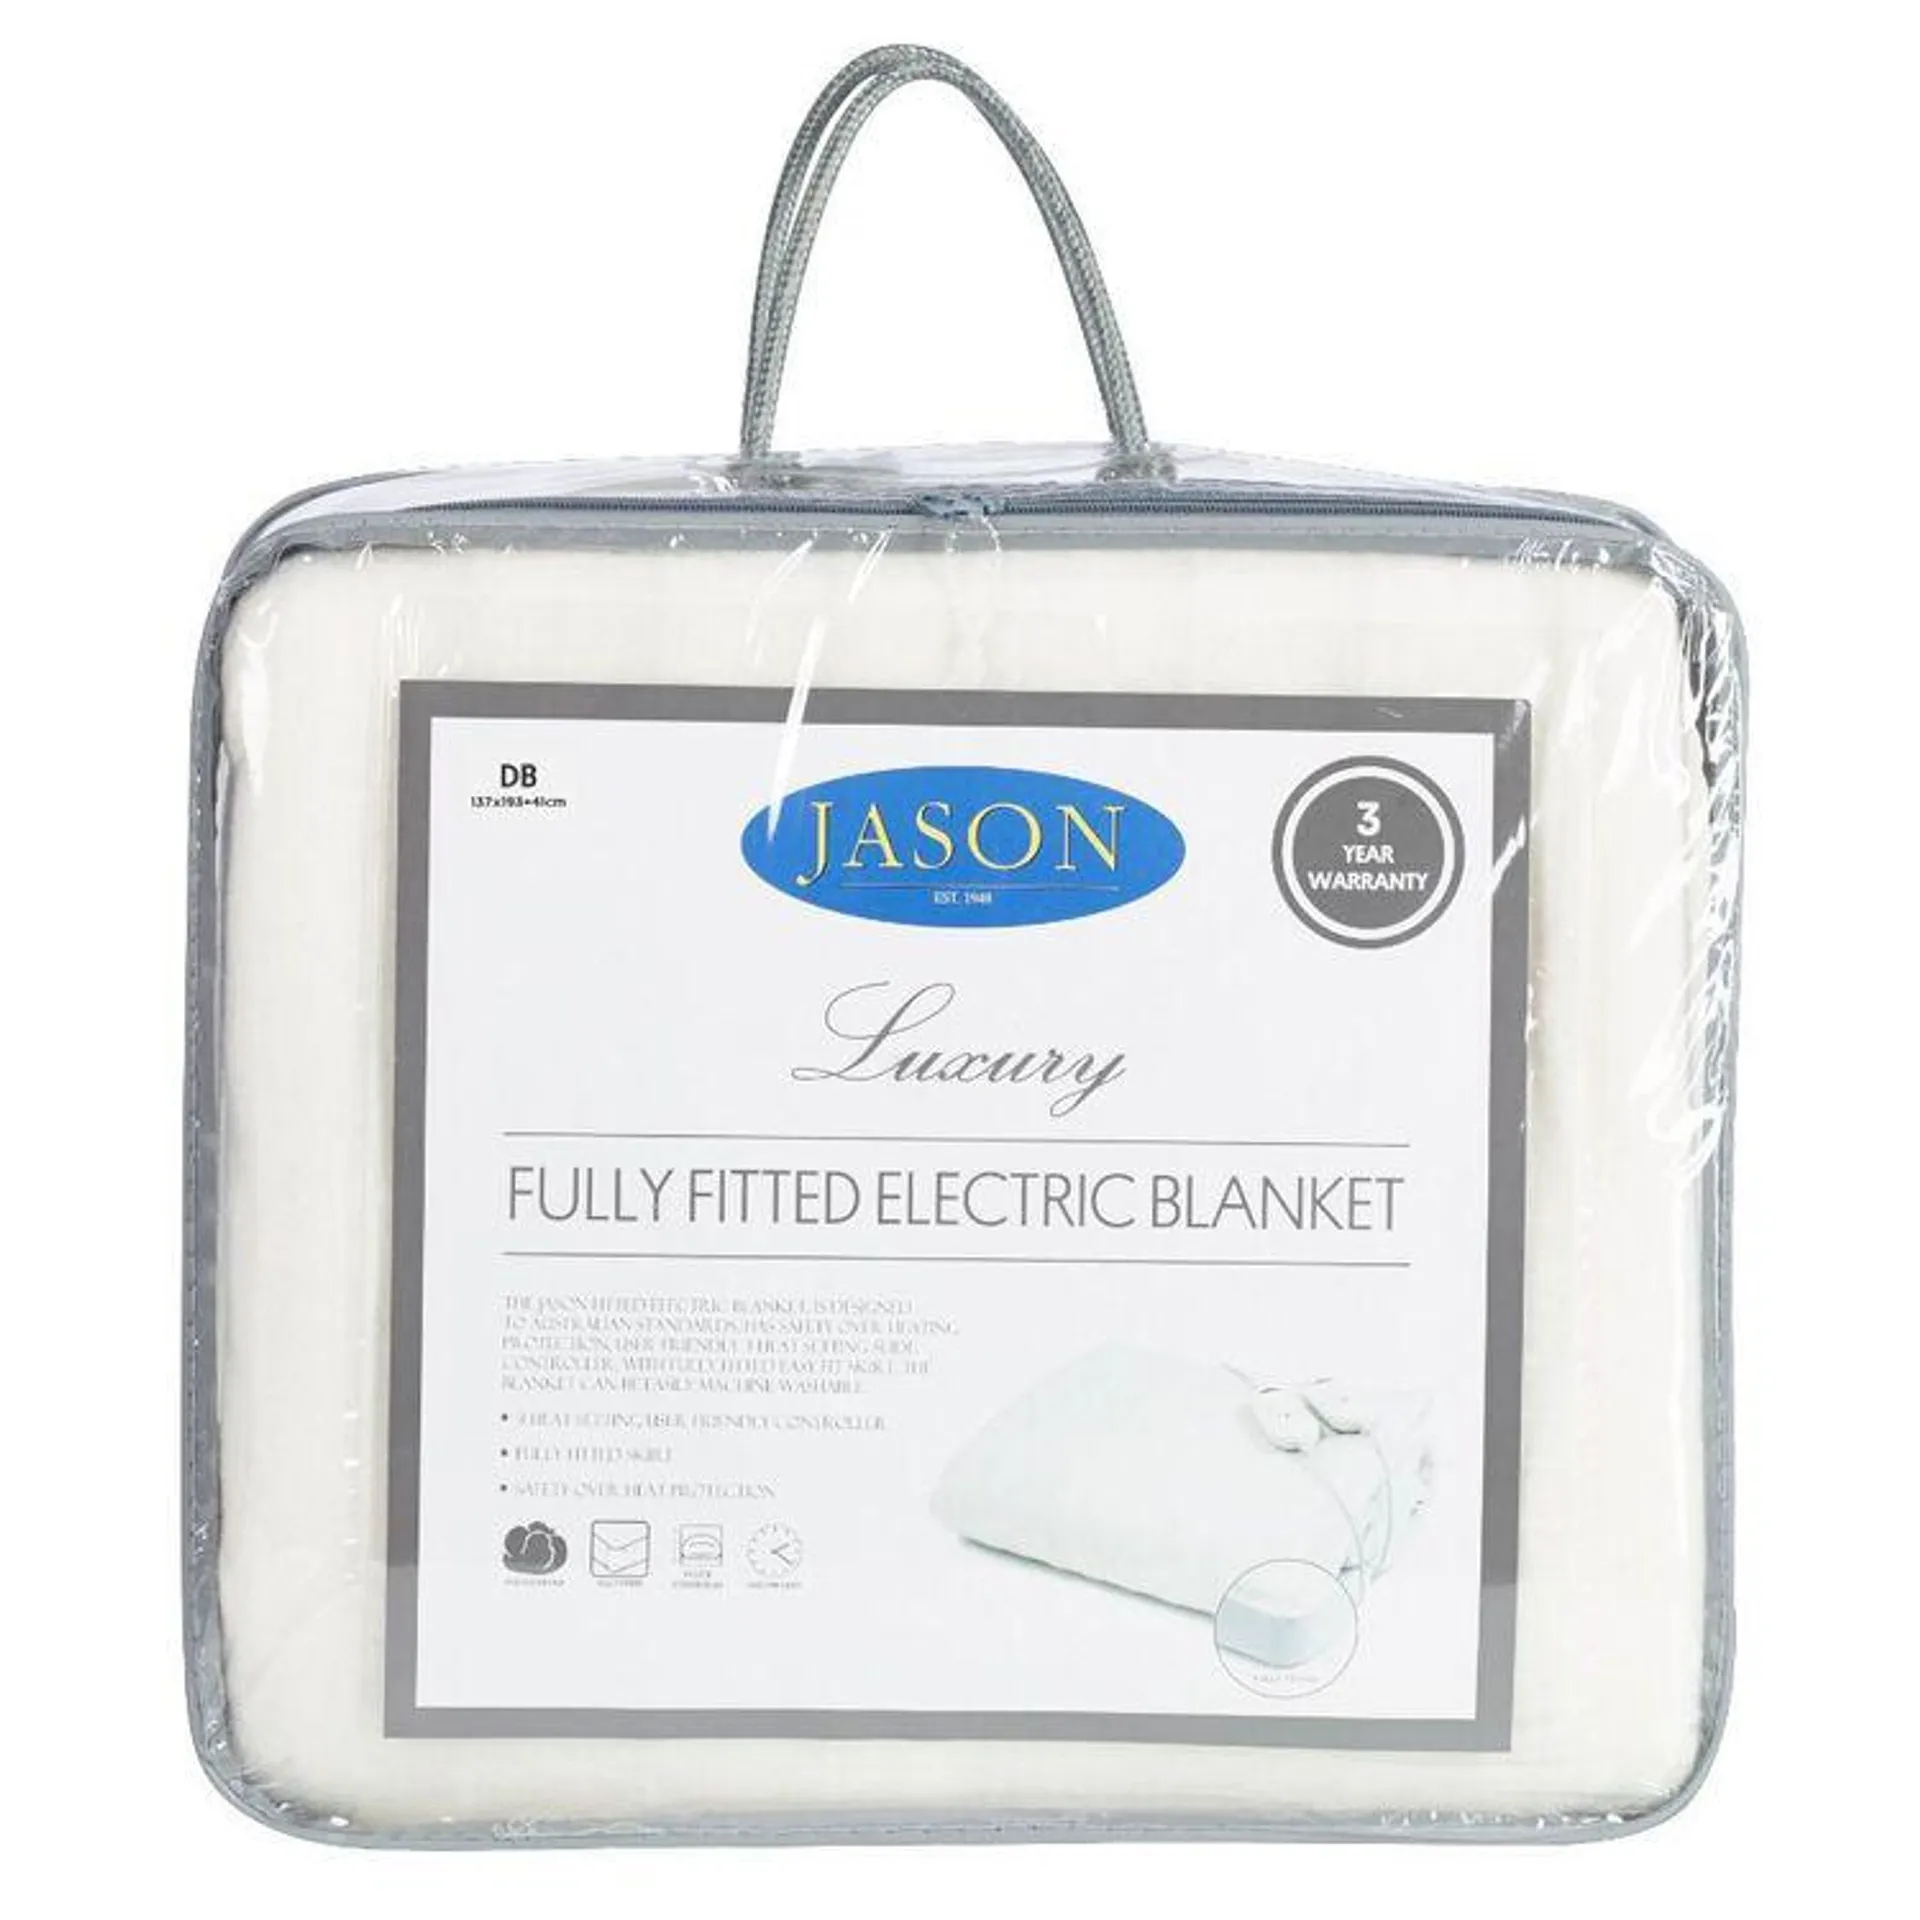 Jason Luxury Fully Fitted Electric Blanket White